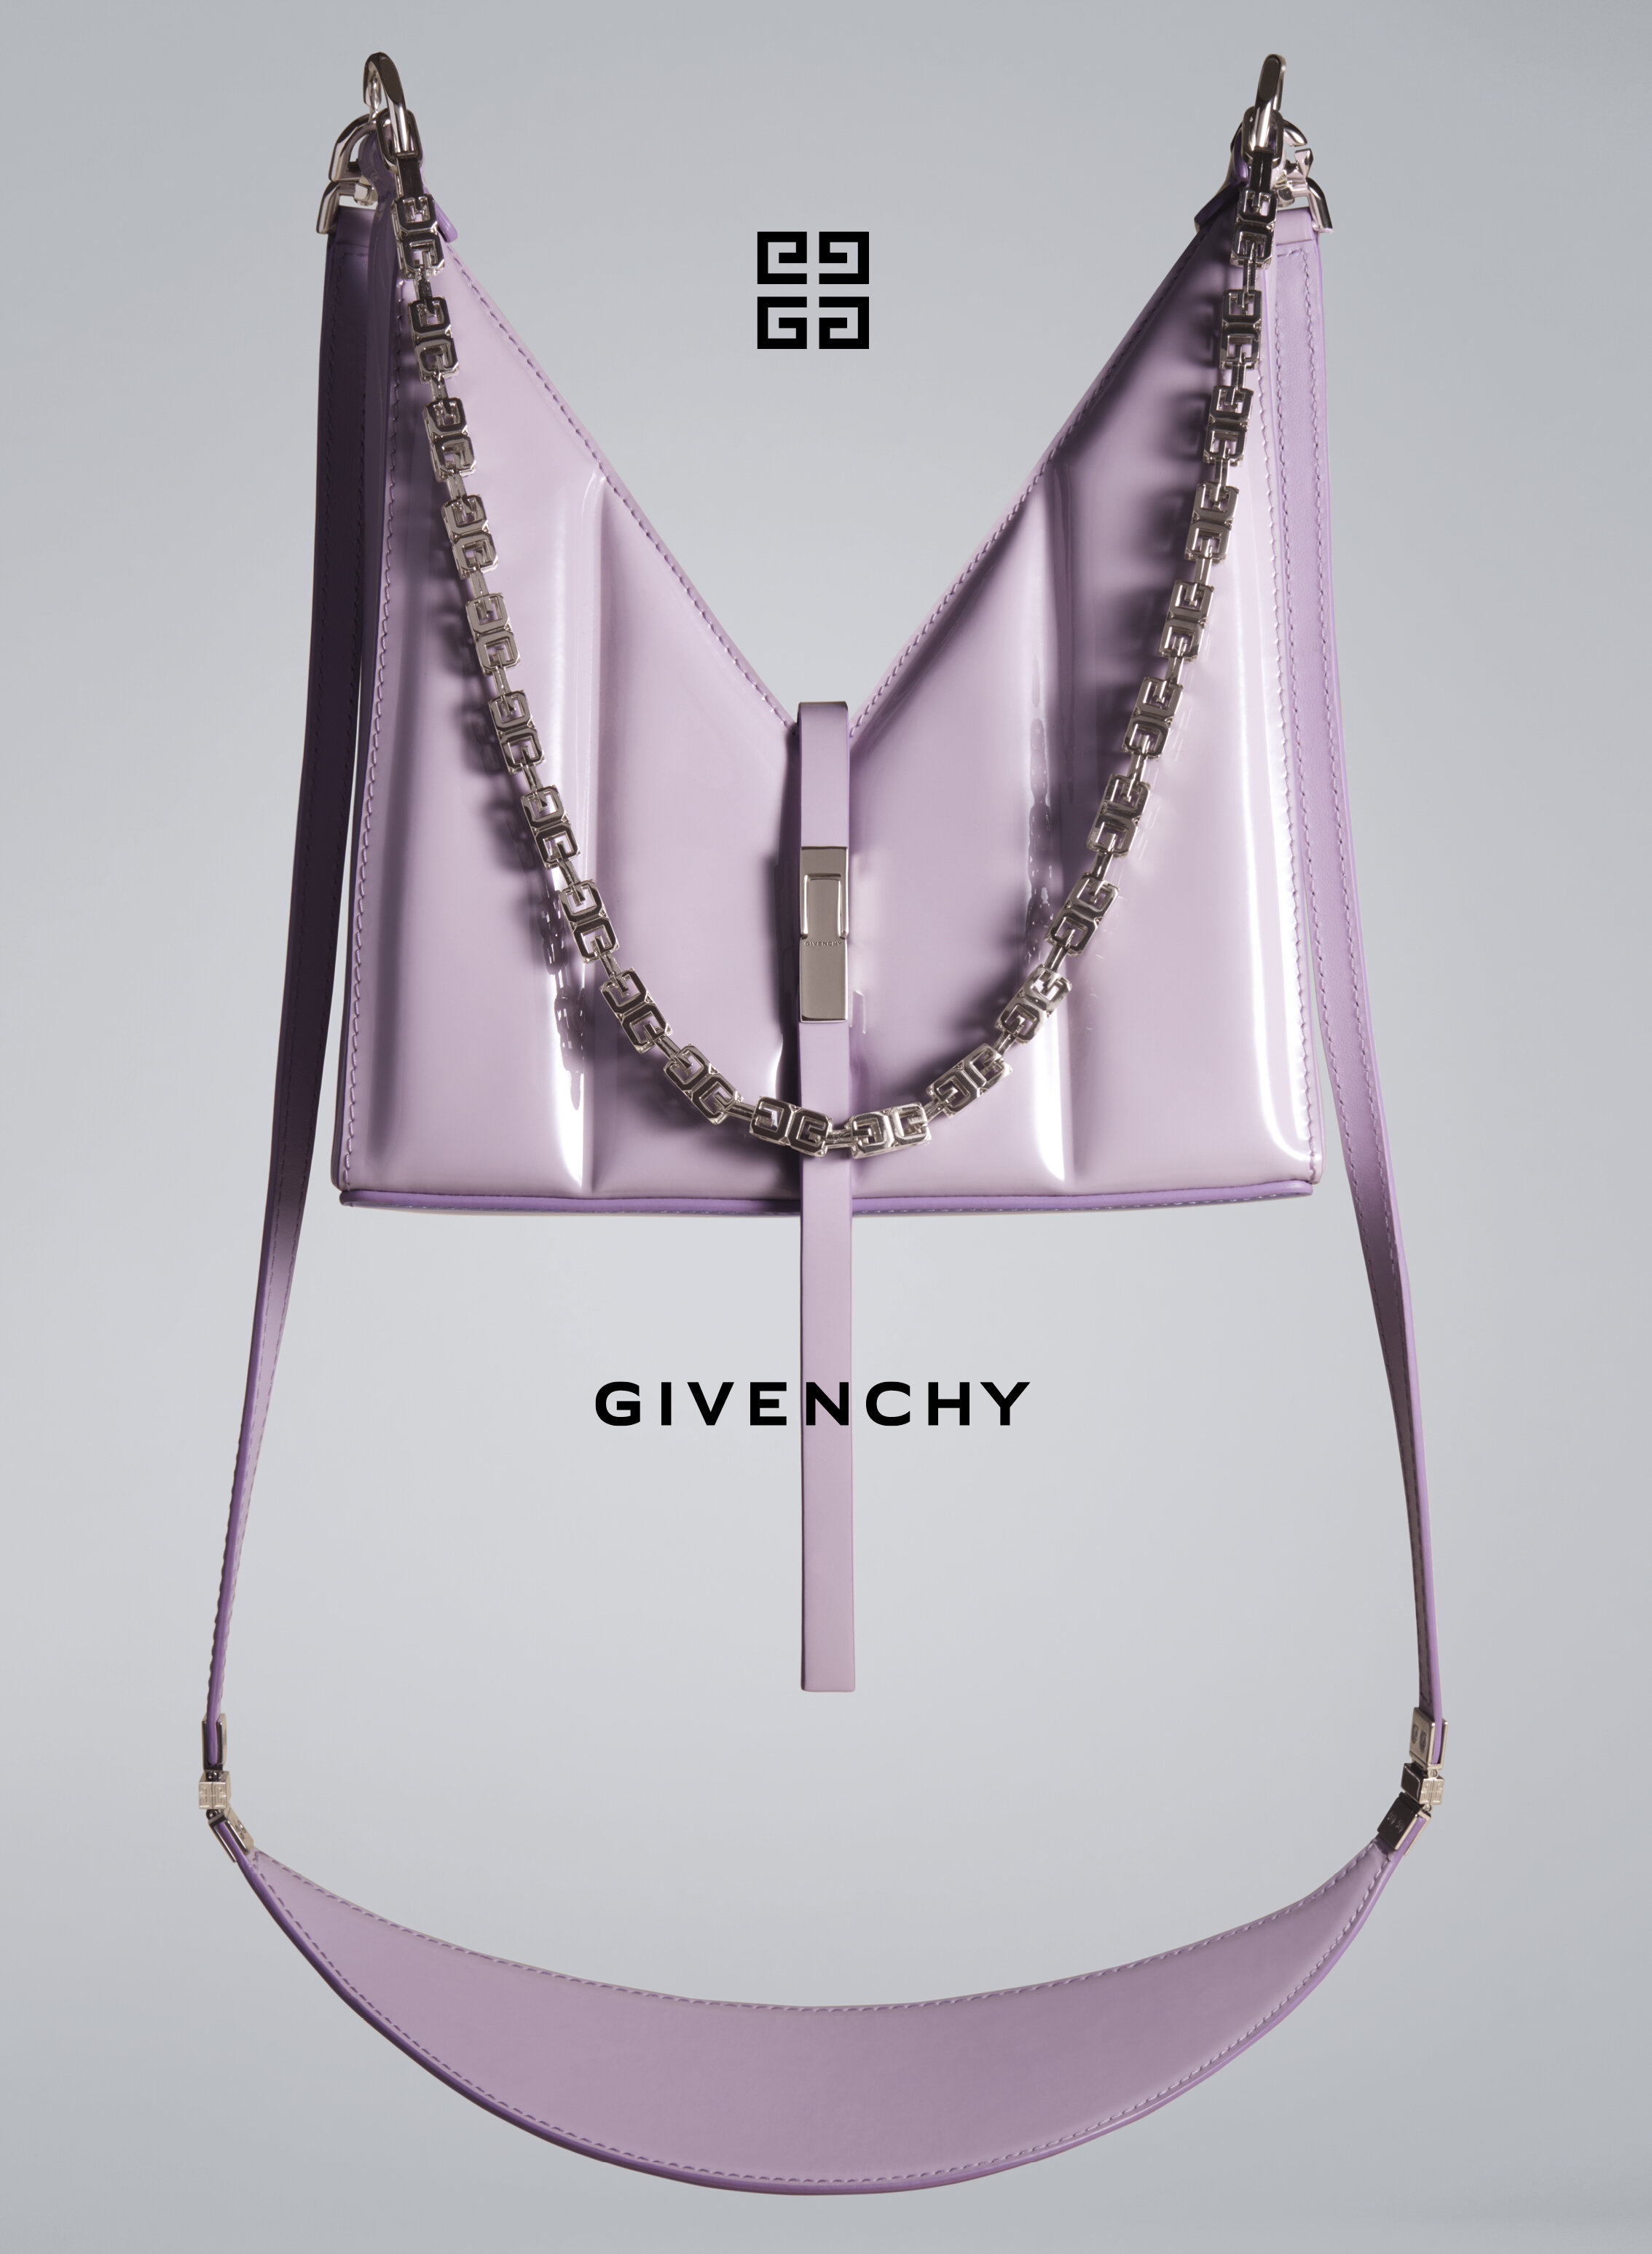 Givenchy - Givenchy is pleased to announce the opening of a new